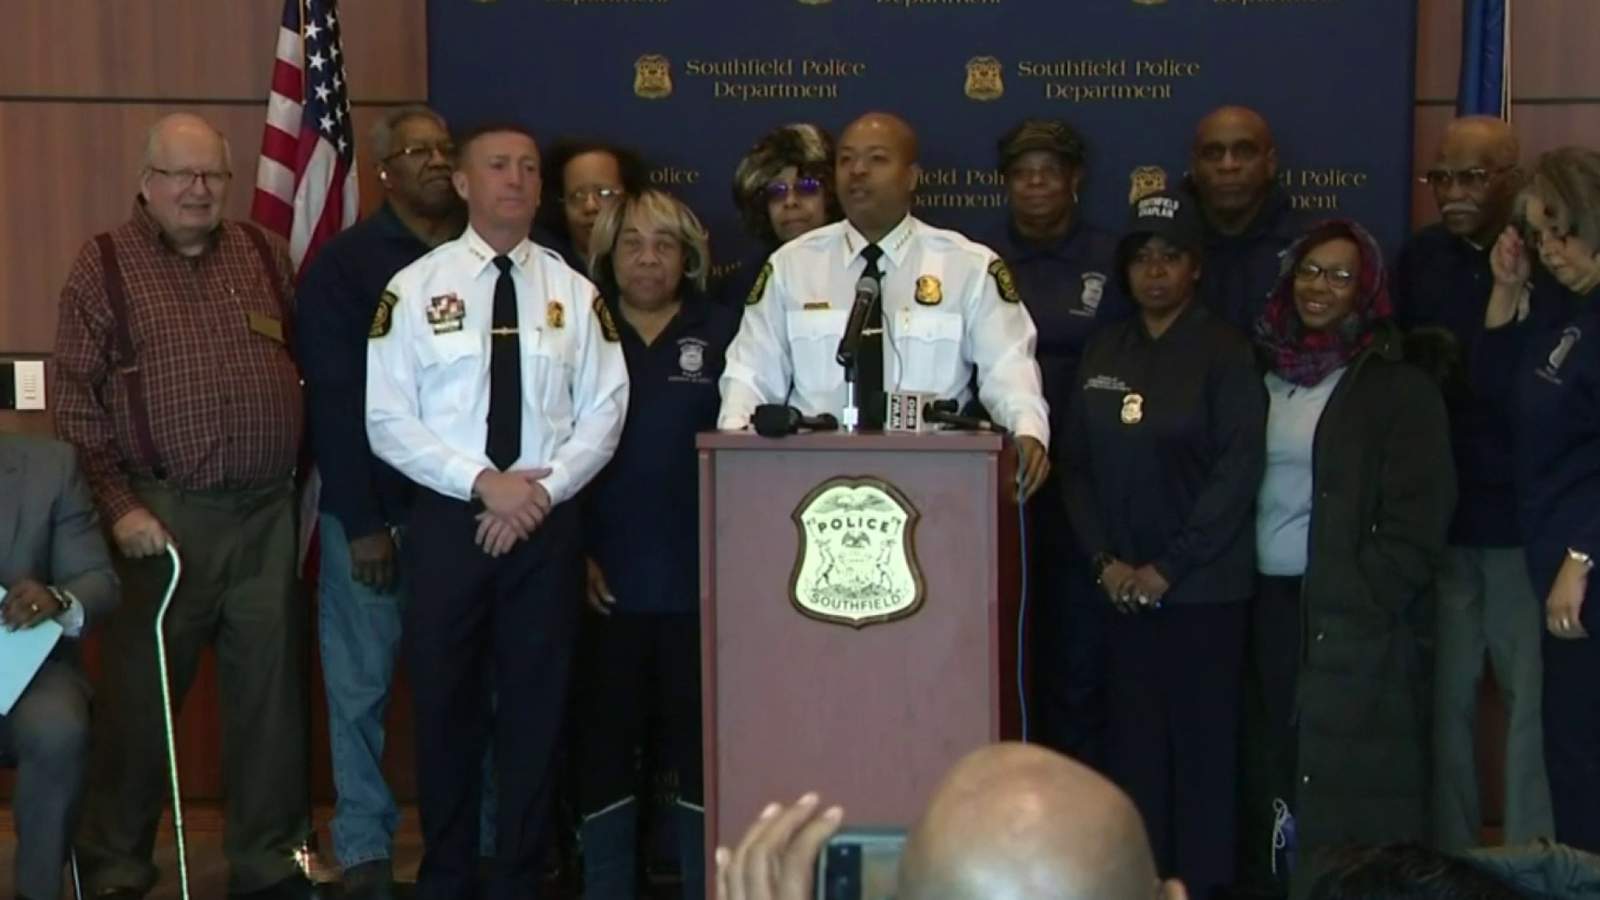 Southfield police launch initiative to focus on quality of life issues